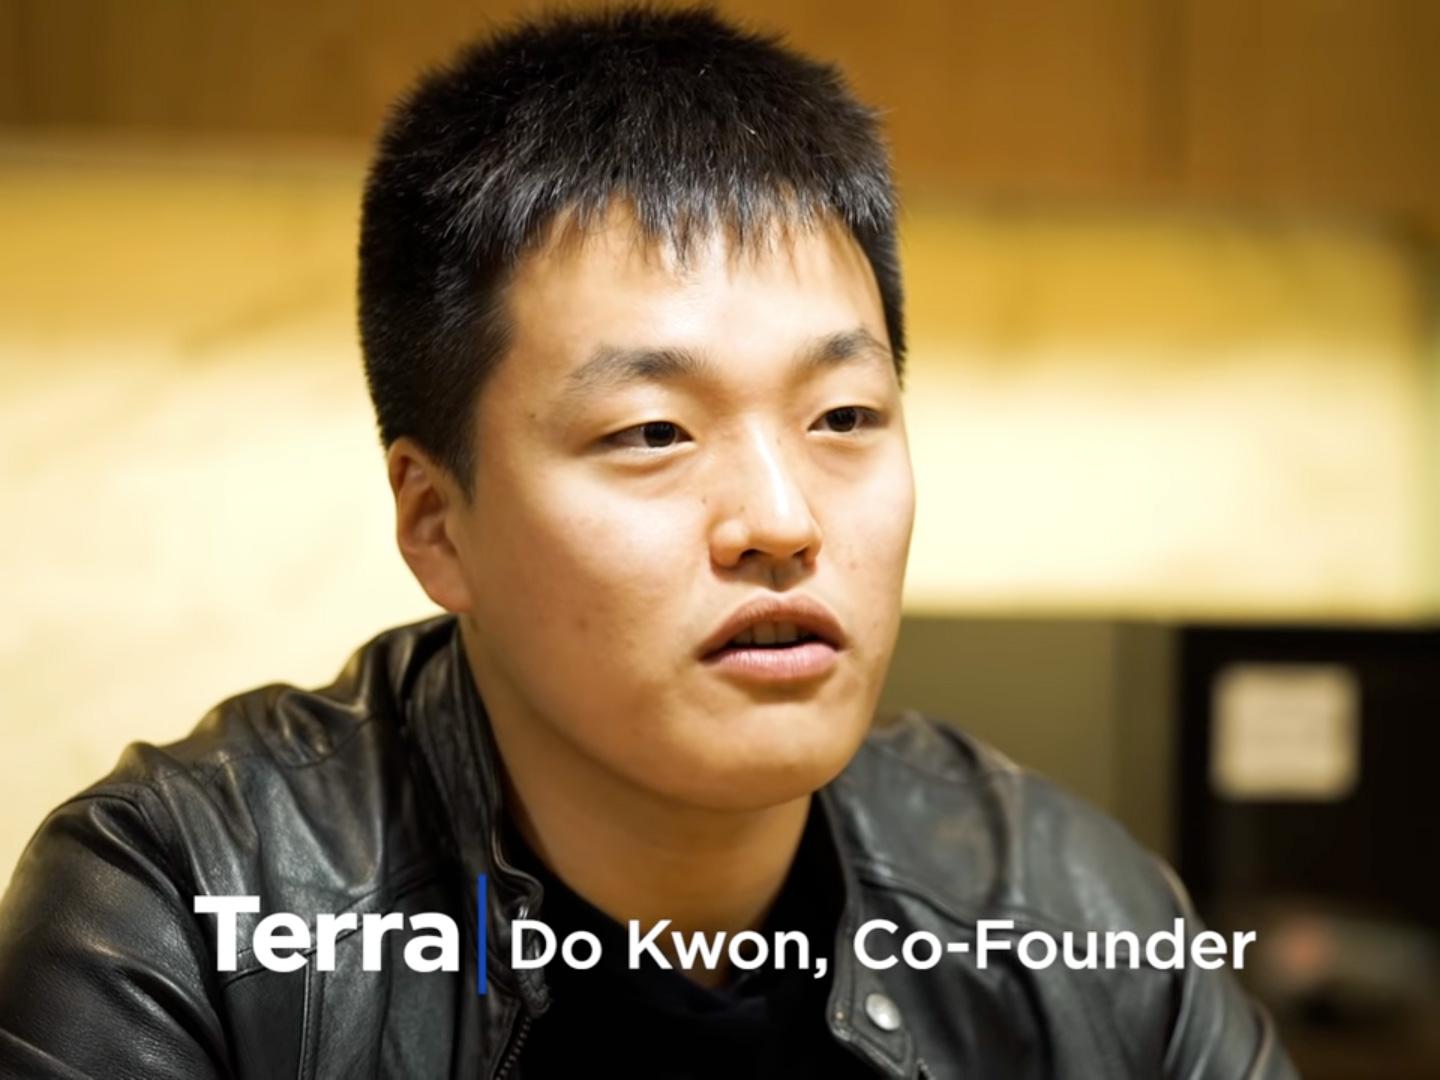 According to investigators, Terra co-founder Do Kwon has allegedly moved $29 million in cryptocurrencies since his arrest